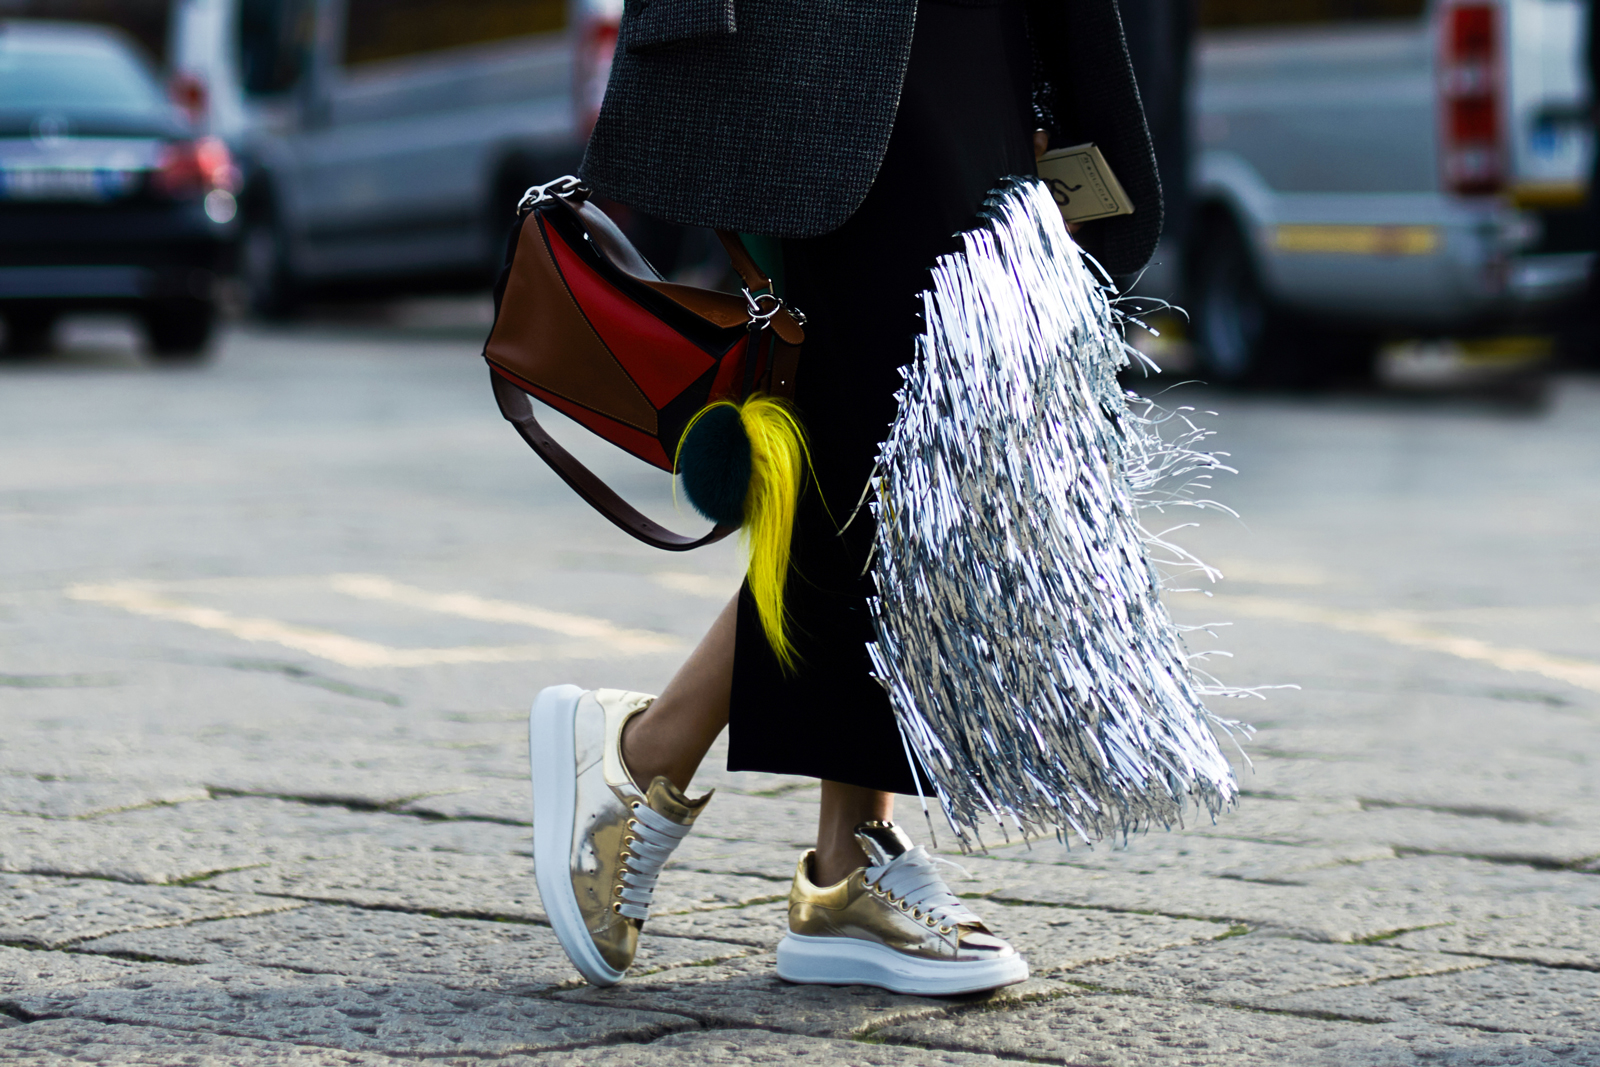 MFW Street Style: A woman wearing a fringed loewe skirt, Loewe bag and Alexander McQueen metallic sneakers before the Gucci Fall 2016 fashion show in Milan